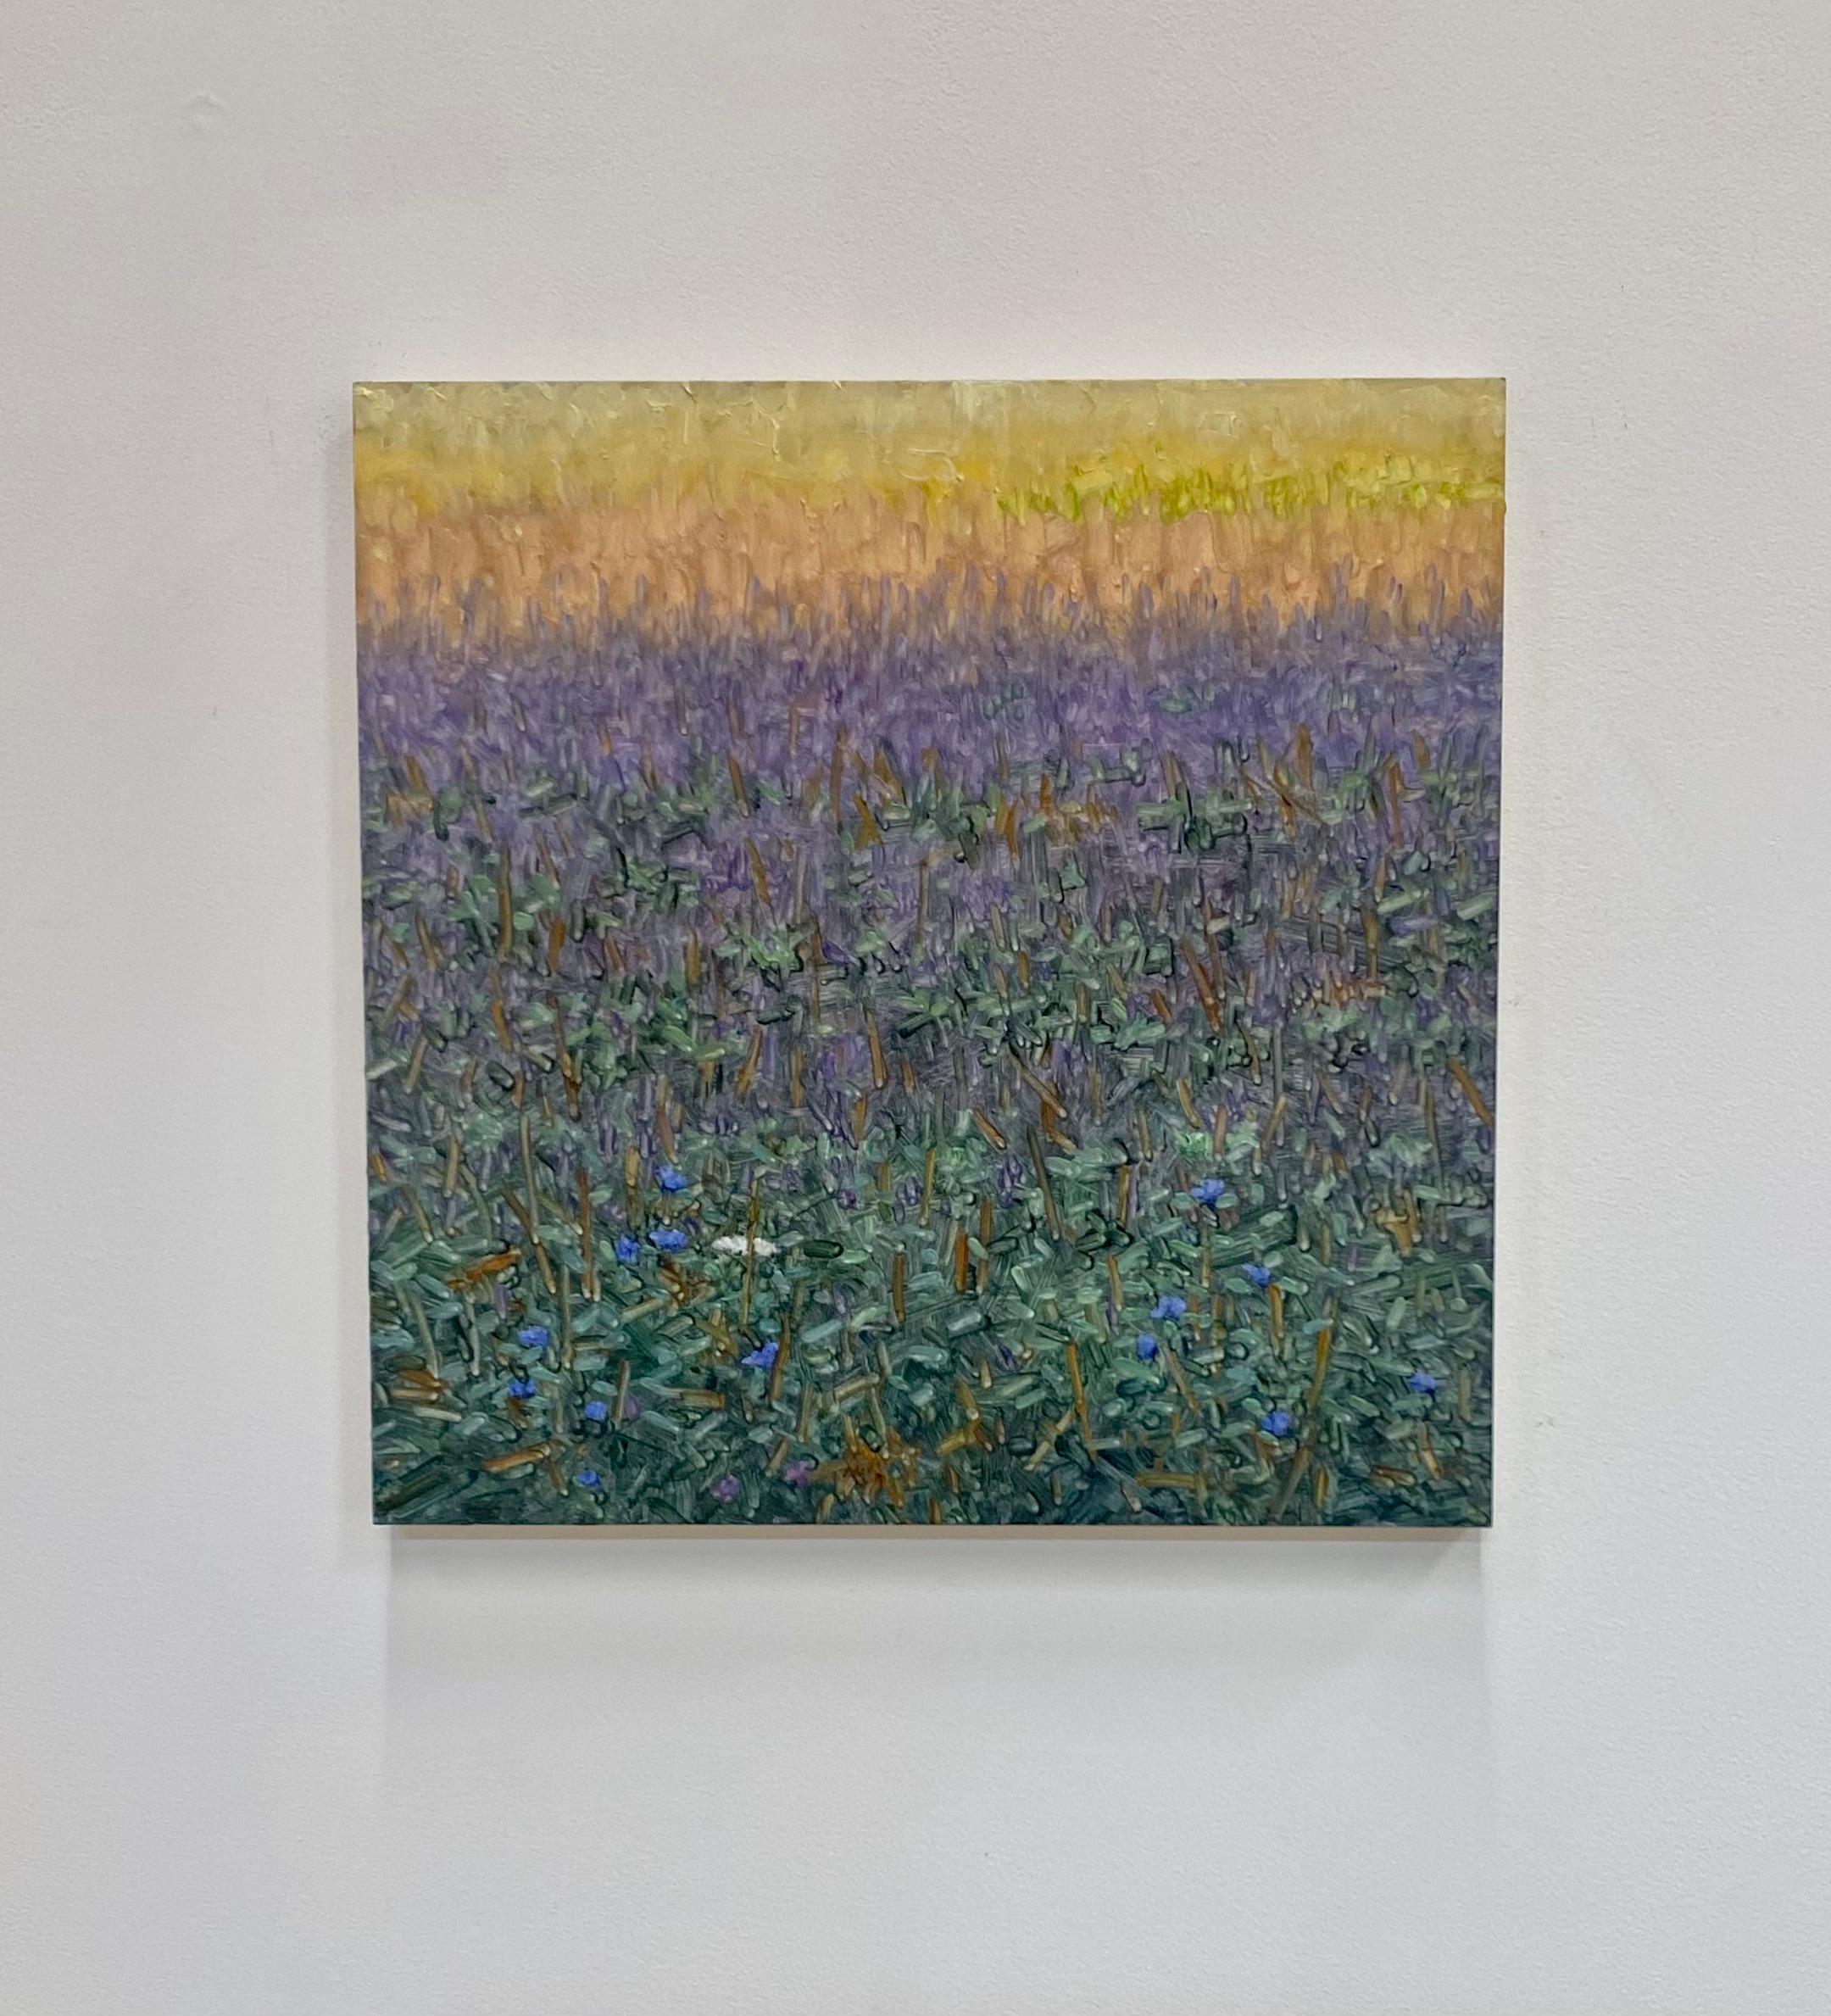 A peaceful outdoor scene with a delicately painted field with periwinkle blue, lavender and white flowers, beautifully capturing the idyllic feel of a field of wildflowers and tall grass in late July. Signed, dated and titled on verso.

The